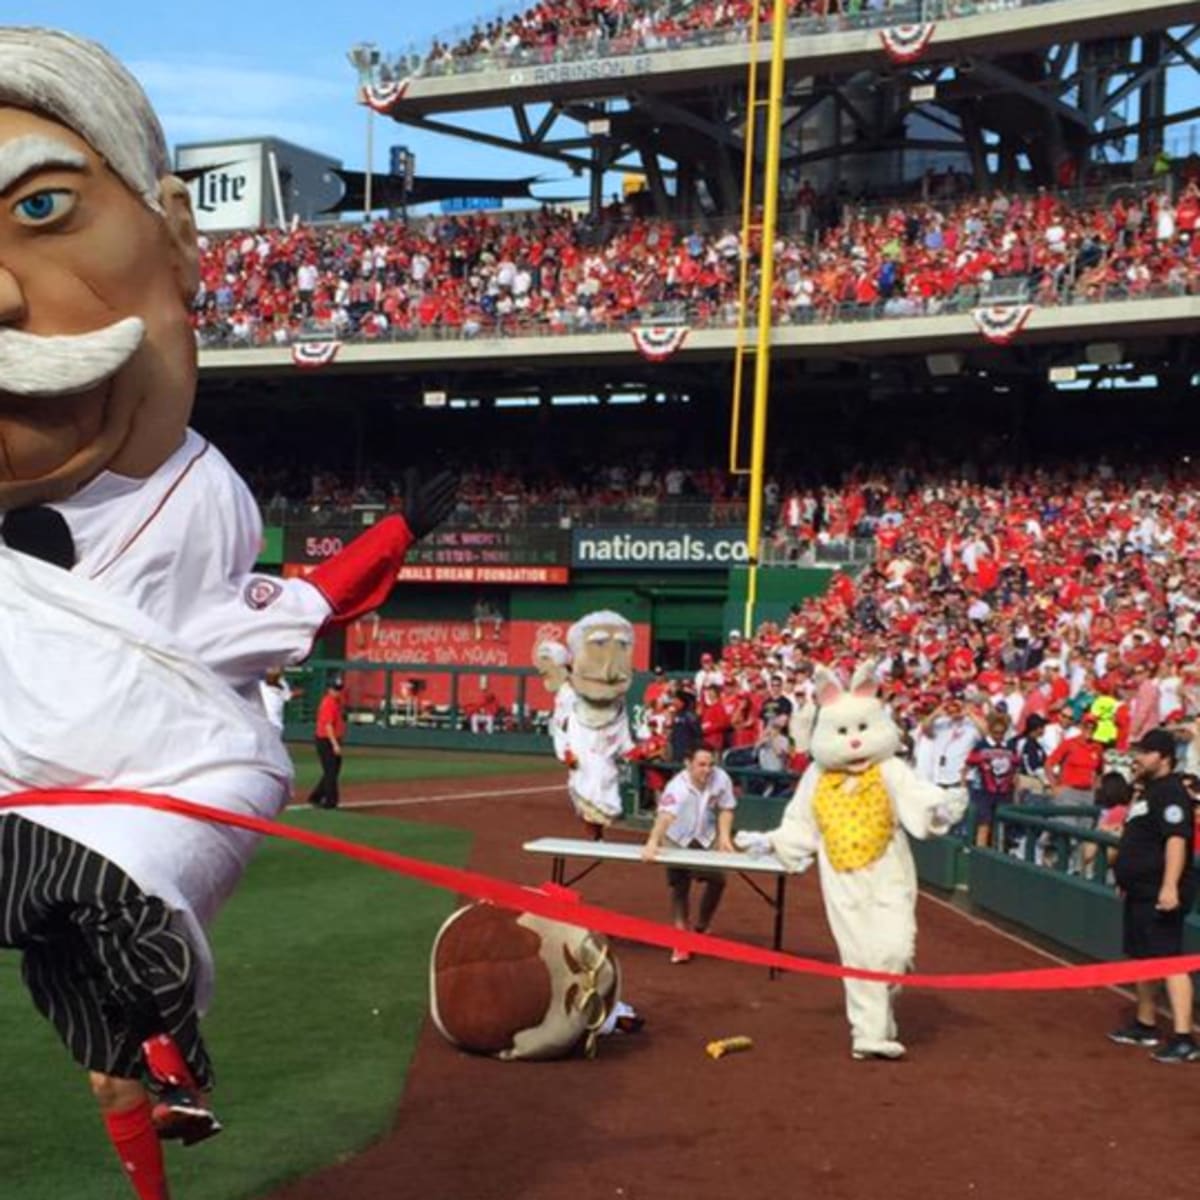 Nationals' President Race: Easter Bunny tackles people - Sports